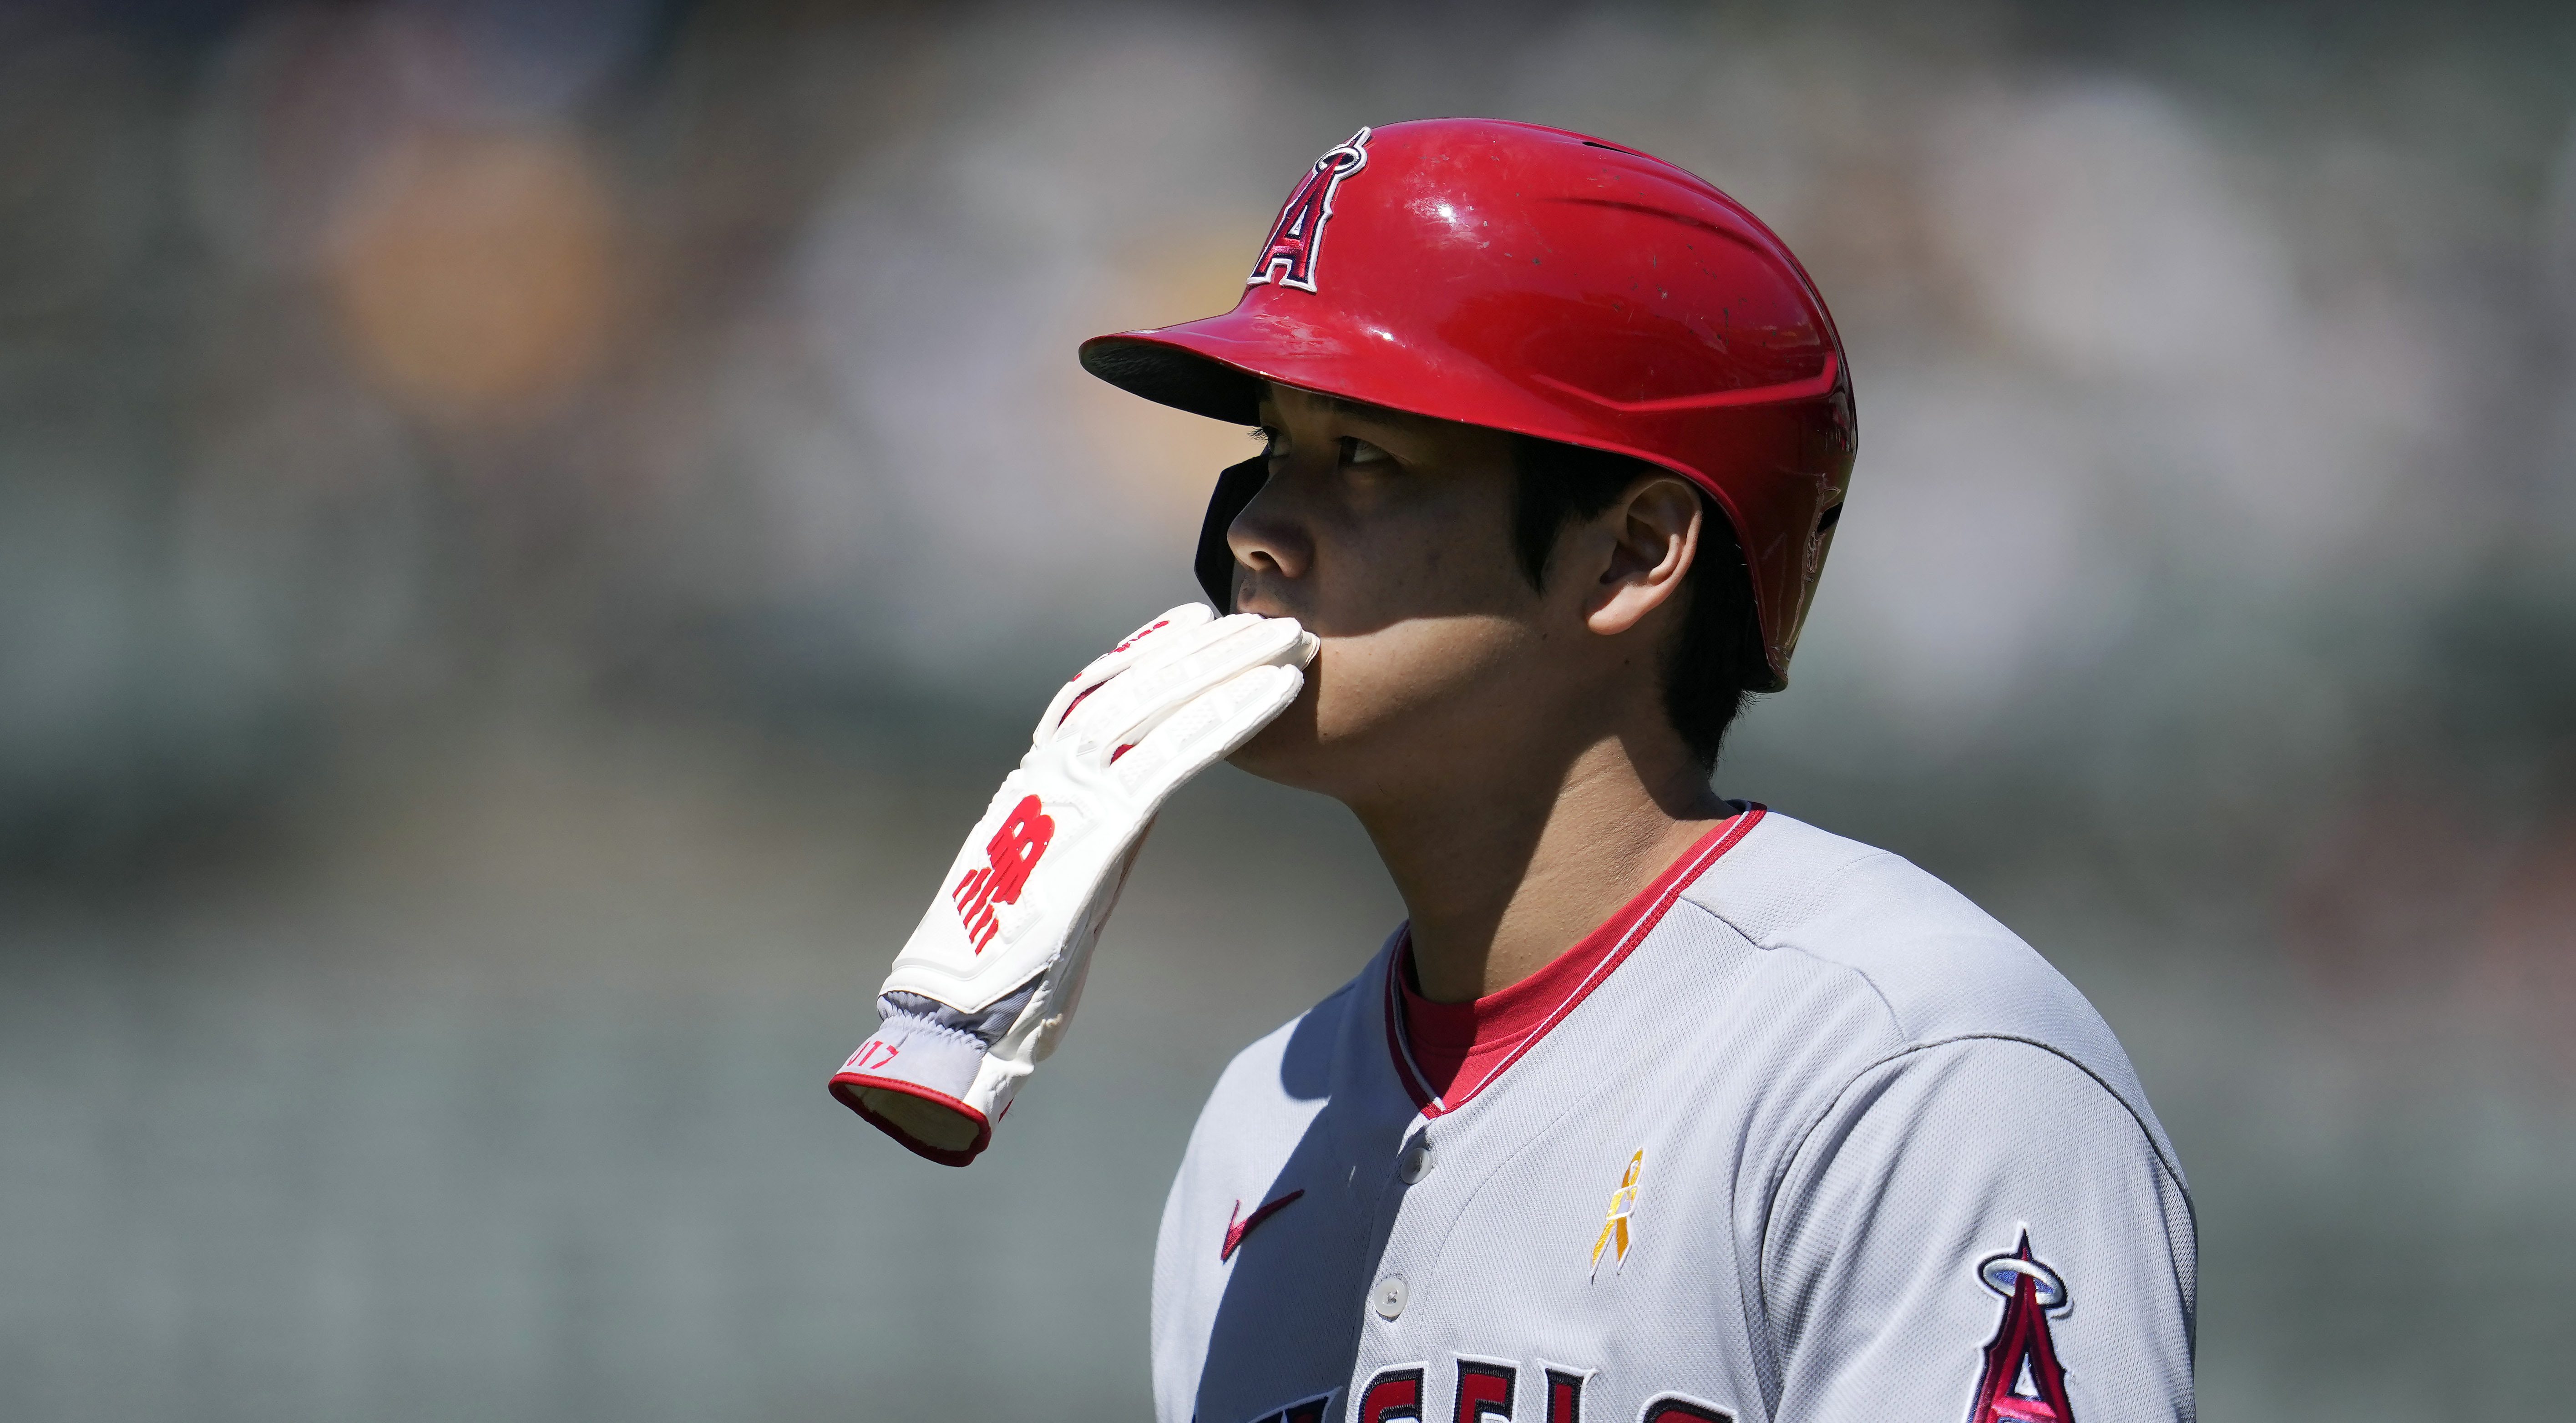 Angels Ohtani out for rest of season with oblique injury